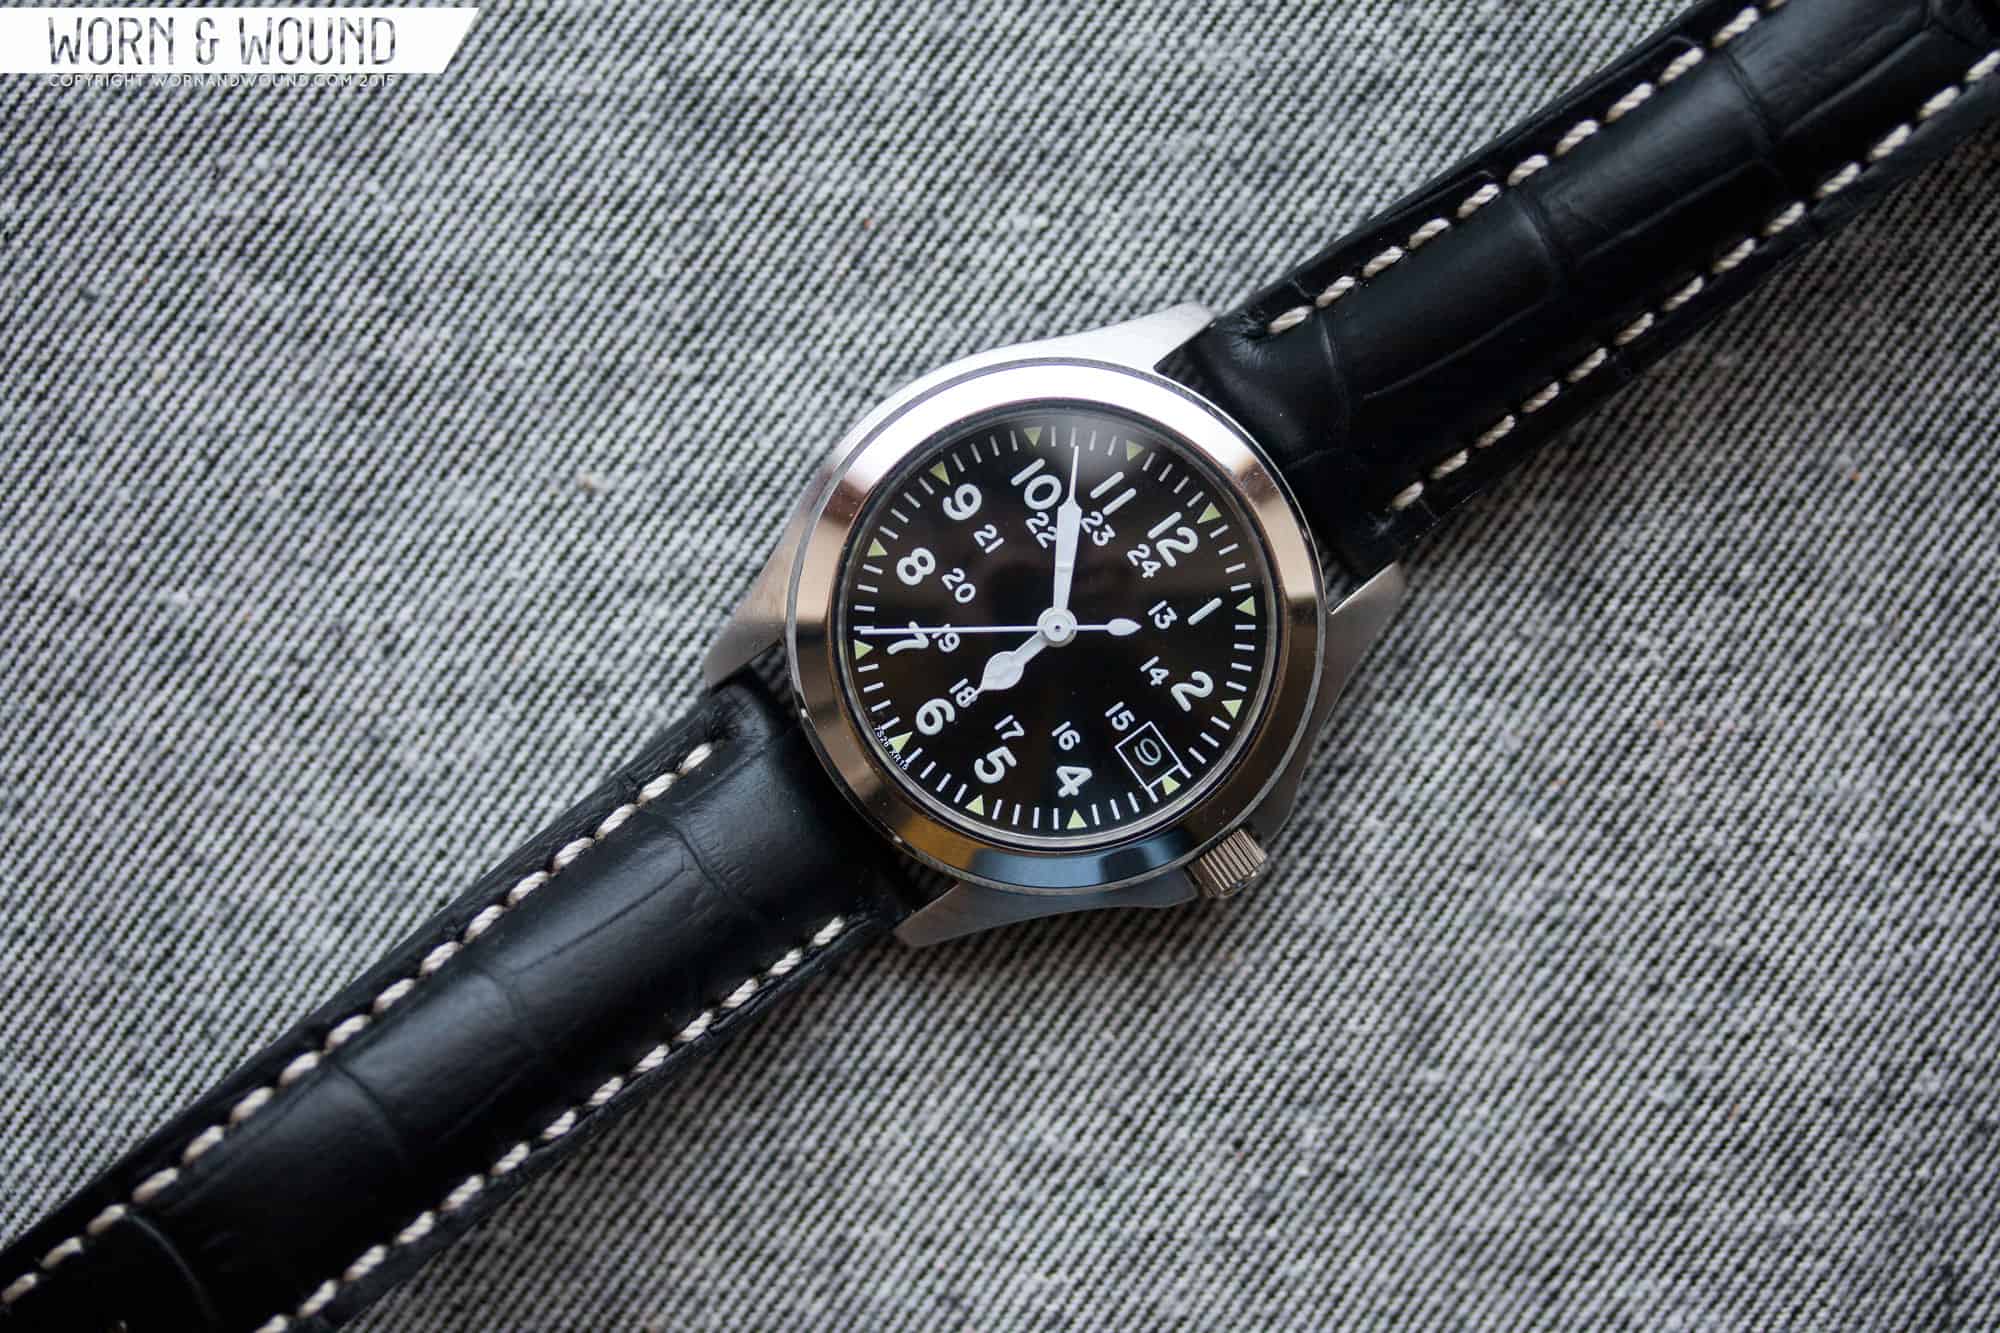 The Field Standard Seiko mod by Go and Behold x Nick Harris - Worn & Wound